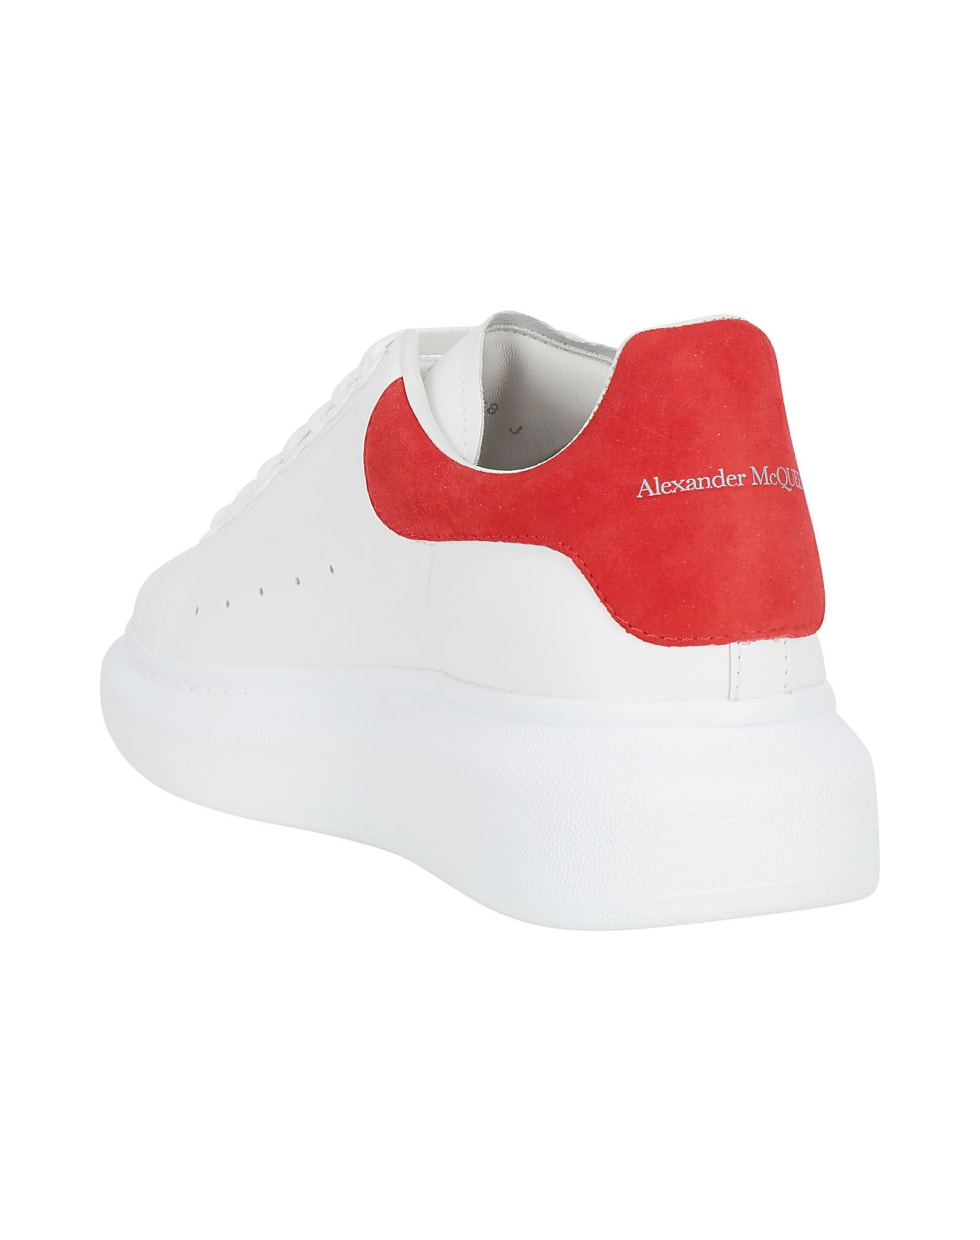 Alexander McQueen Oversized Low-top Sneakers - White/lust red